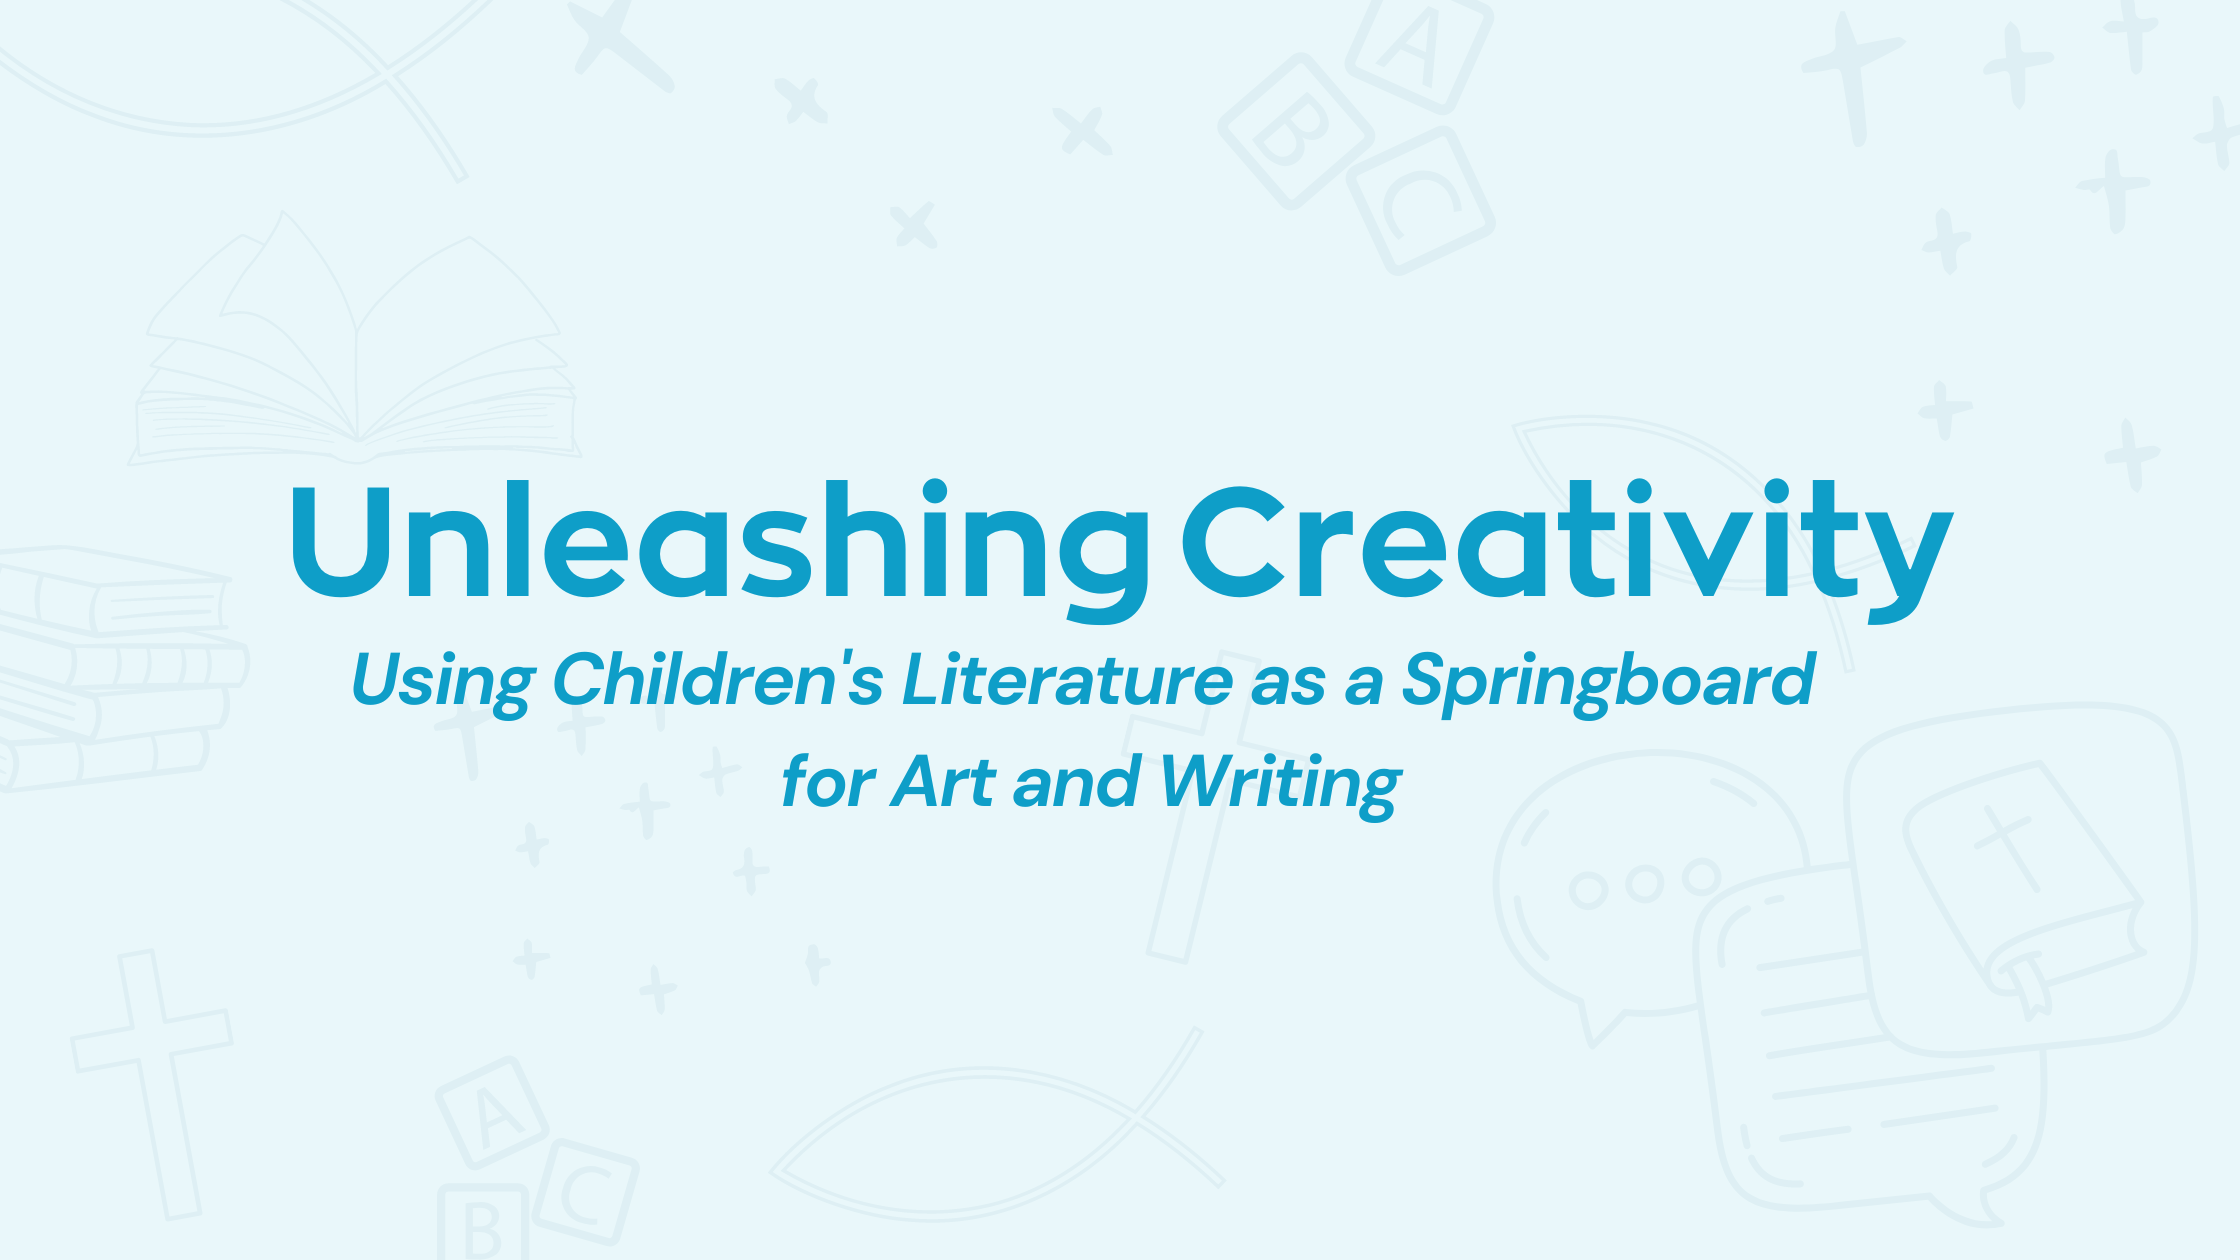 Unleashing Creativity: Using Children's Literature as a Springboard for Art and Writing